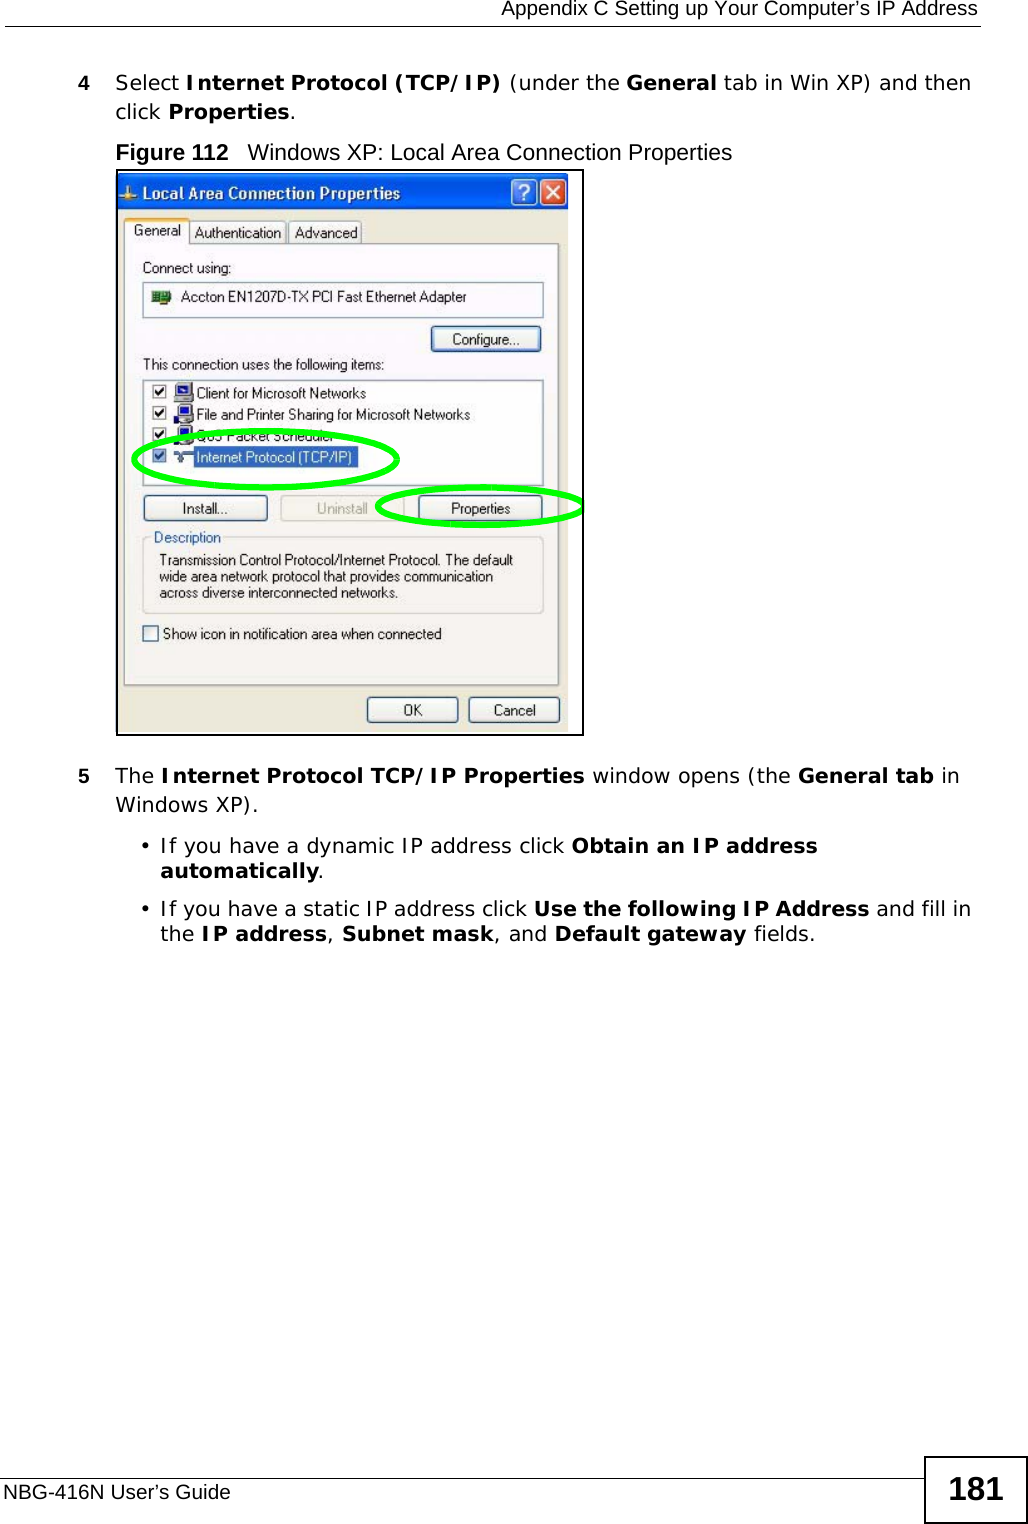  Appendix C Setting up Your Computer’s IP AddressNBG-416N User’s Guide 1814Select Internet Protocol (TCP/IP) (under the General tab in Win XP) and then click Properties.Figure 112   Windows XP: Local Area Connection Properties5The Internet Protocol TCP/IP Properties window opens (the General tab in Windows XP).• If you have a dynamic IP address click Obtain an IP address automatically.• If you have a static IP address click Use the following IP Address and fill in the IP address, Subnet mask, and Default gateway fields. 